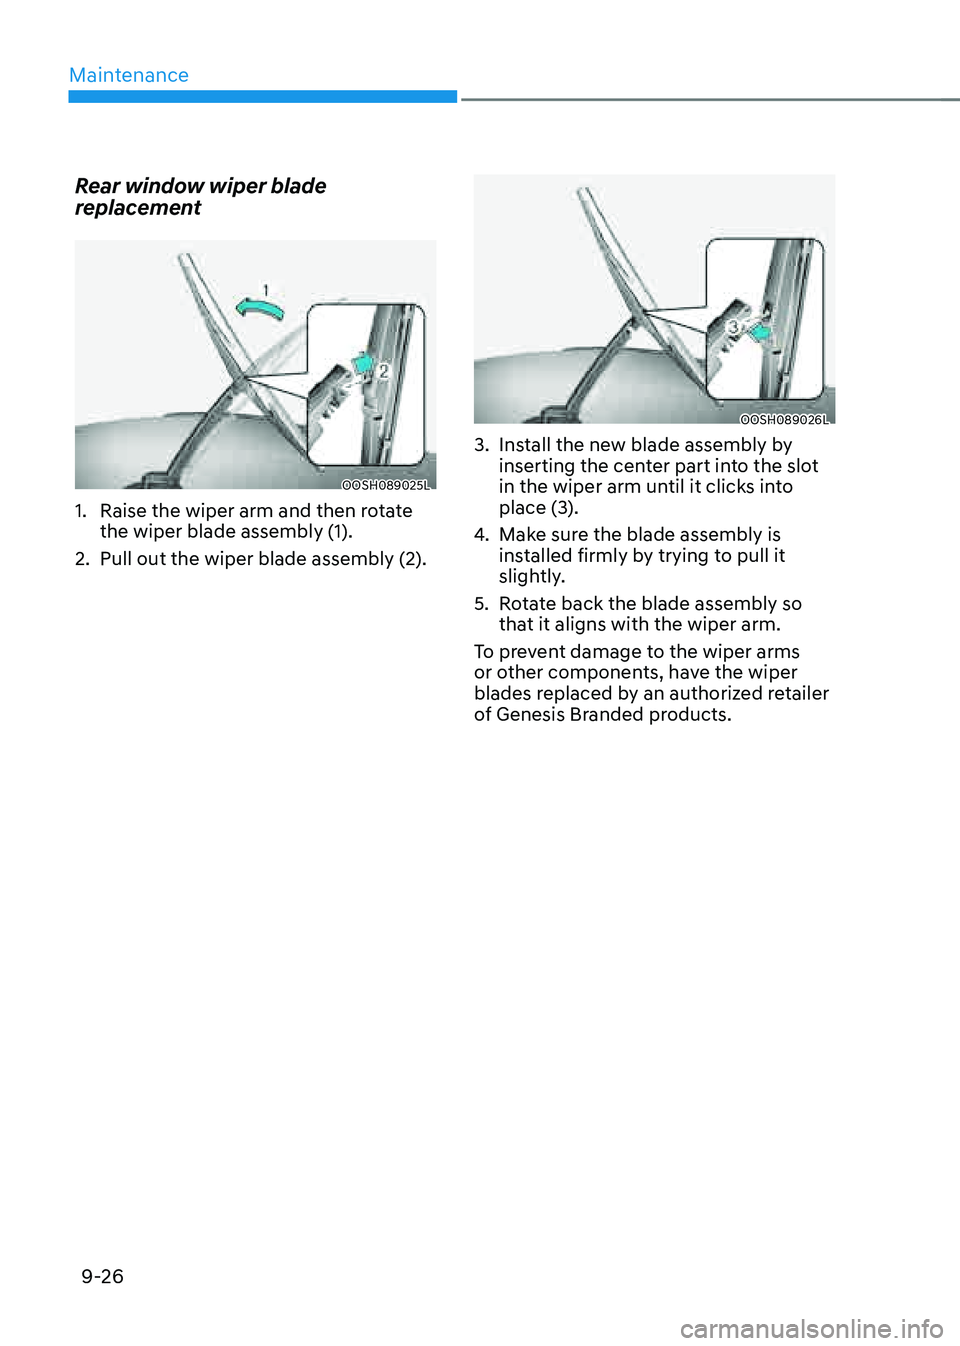 GENESIS GV80 2021  Owners Manual Maintenance
9-26
Rear window wiper blade 
replacement
OOSH089025LOOSH089025L
1. Raise the wiper arm and then rotate 
the wiper blade assembly (1).
2. Pull out the wiper blade assembly (2).
OOSH089026L